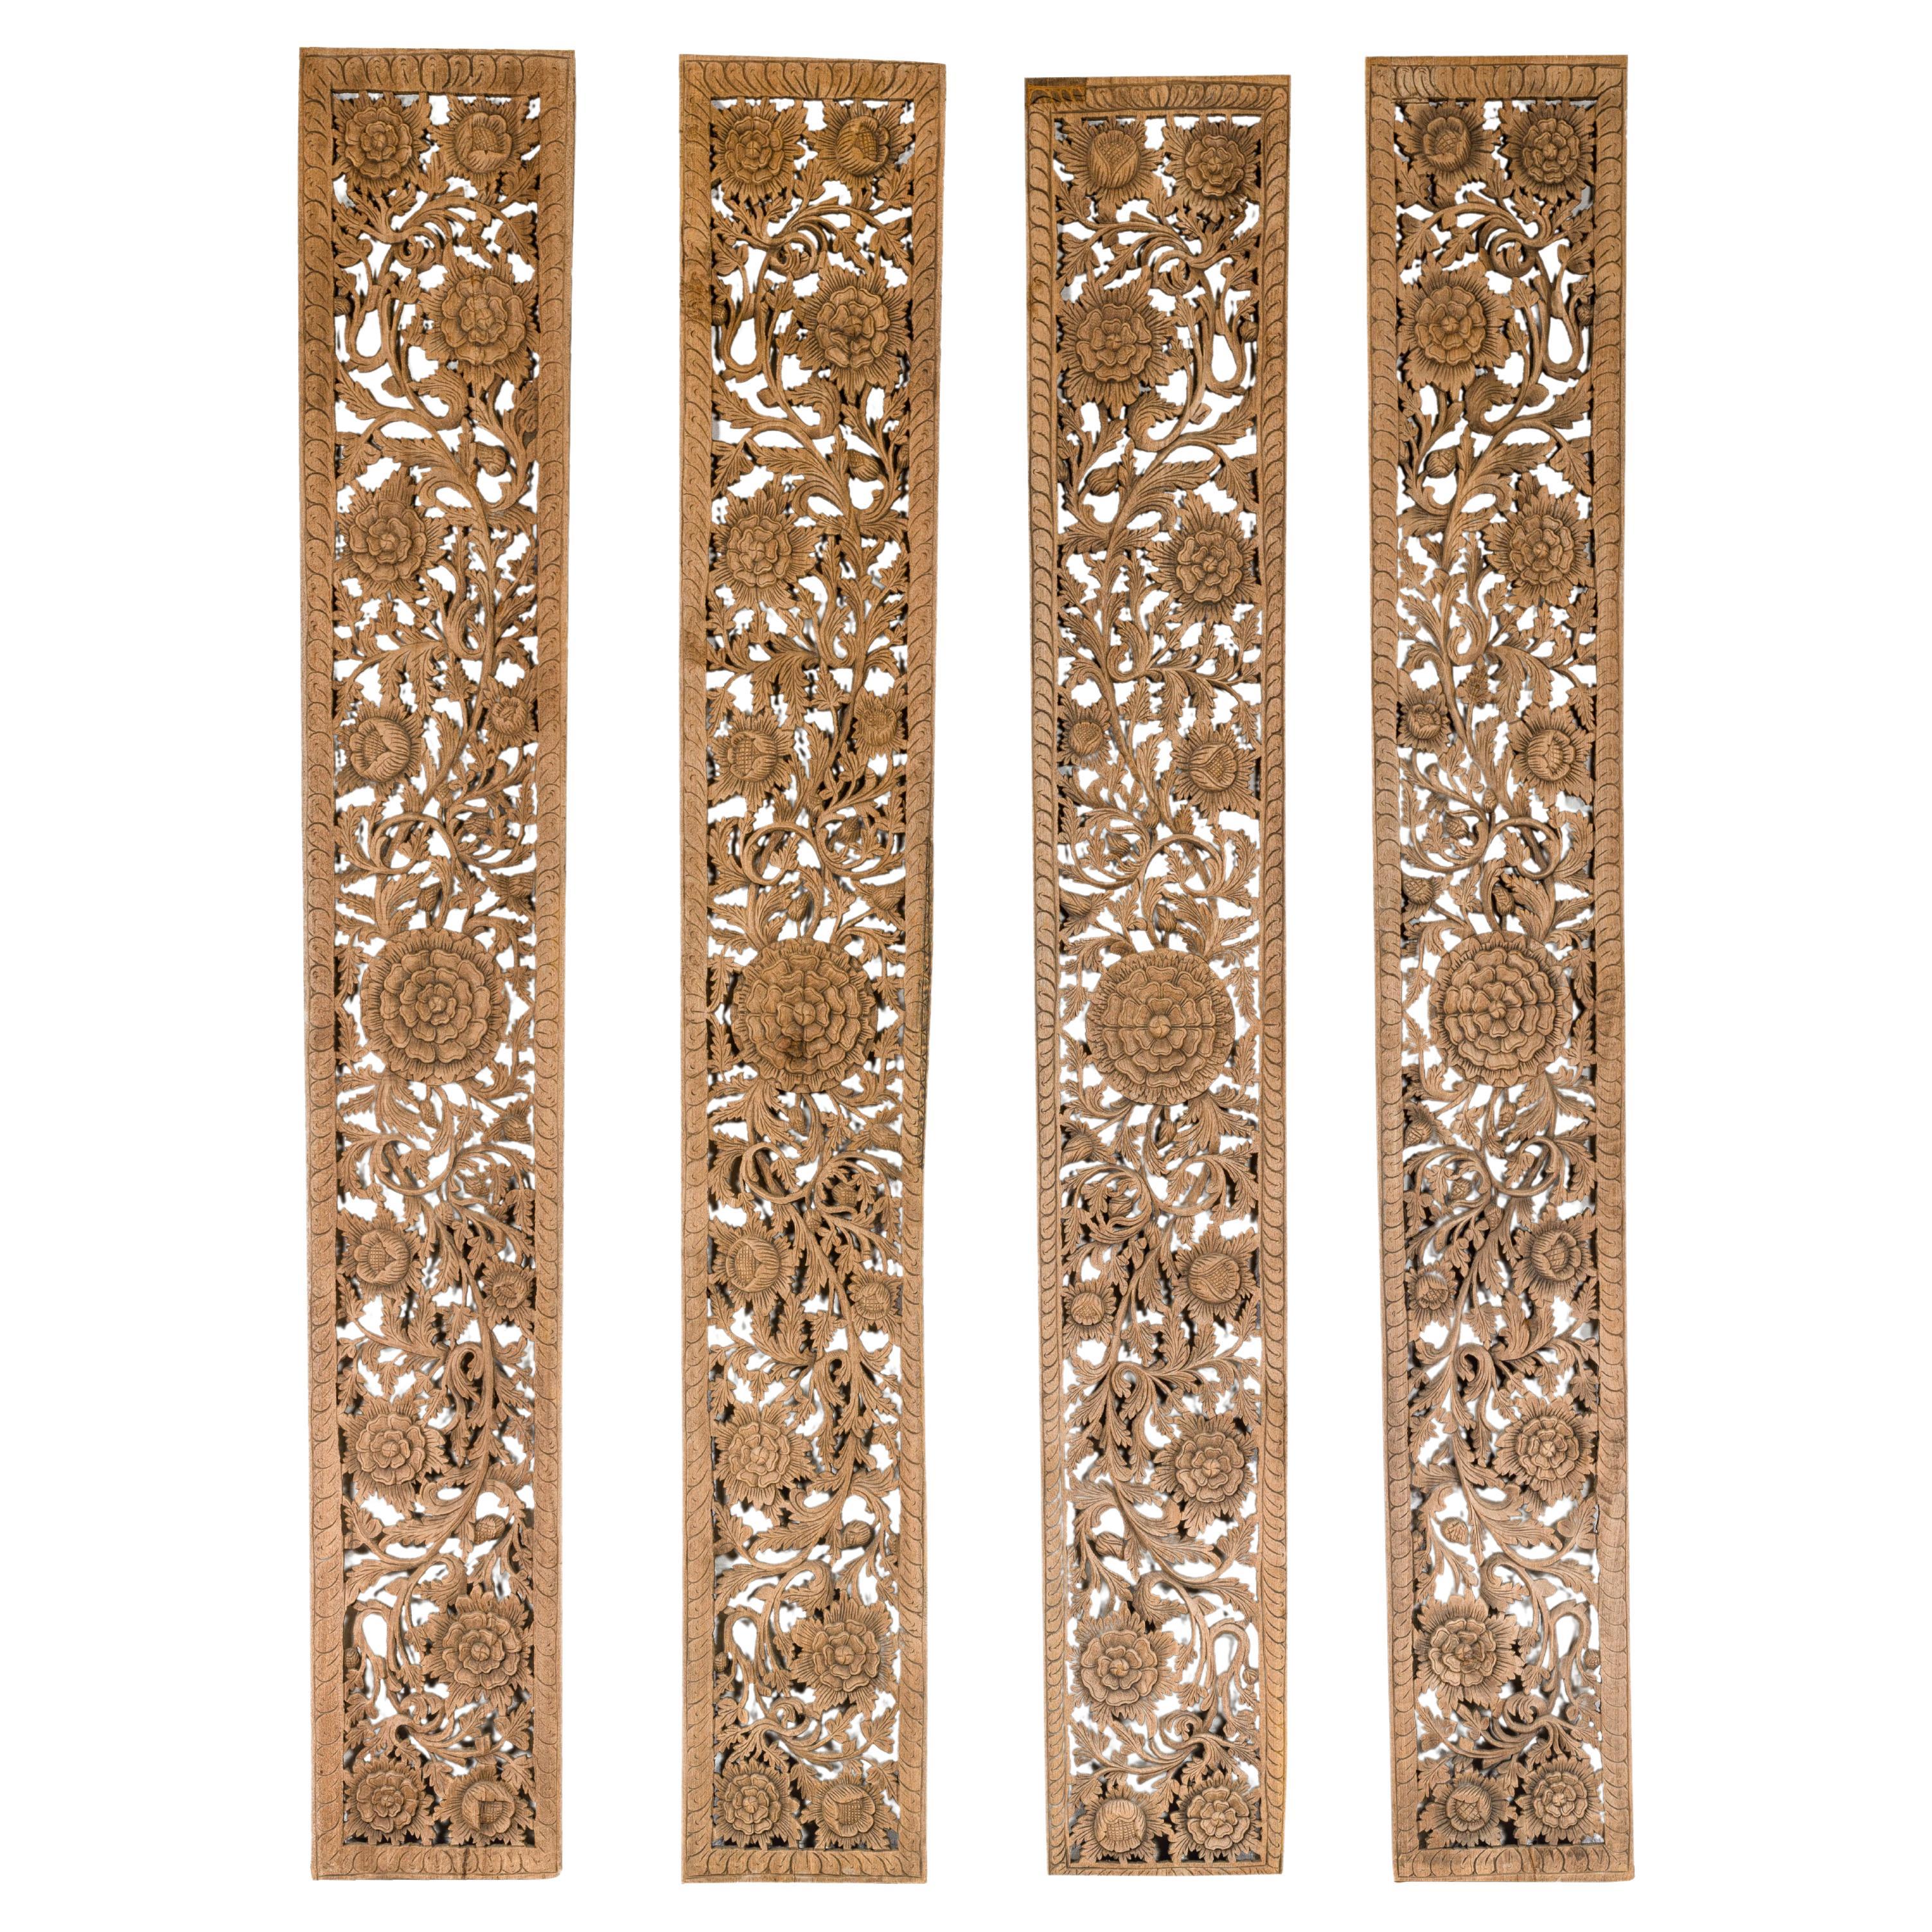 Set of Four Architectural Panels with Hand-Carved Scrollwork and Floral Motifs For Sale